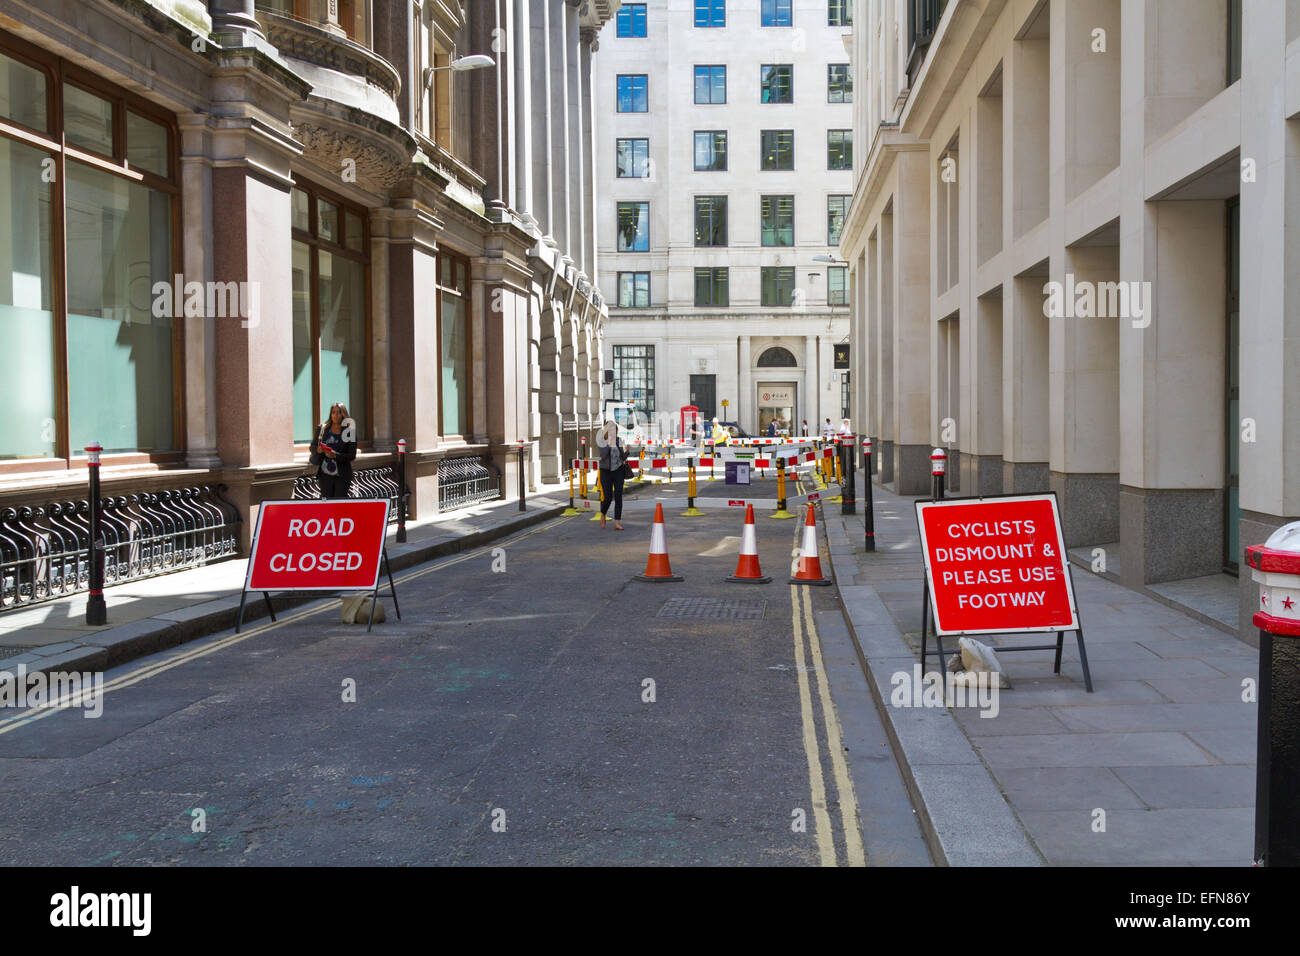 Road closed in the City of London with signs showing 'Cyclists dismount & please use footway' and 'road closed' Stock Photo